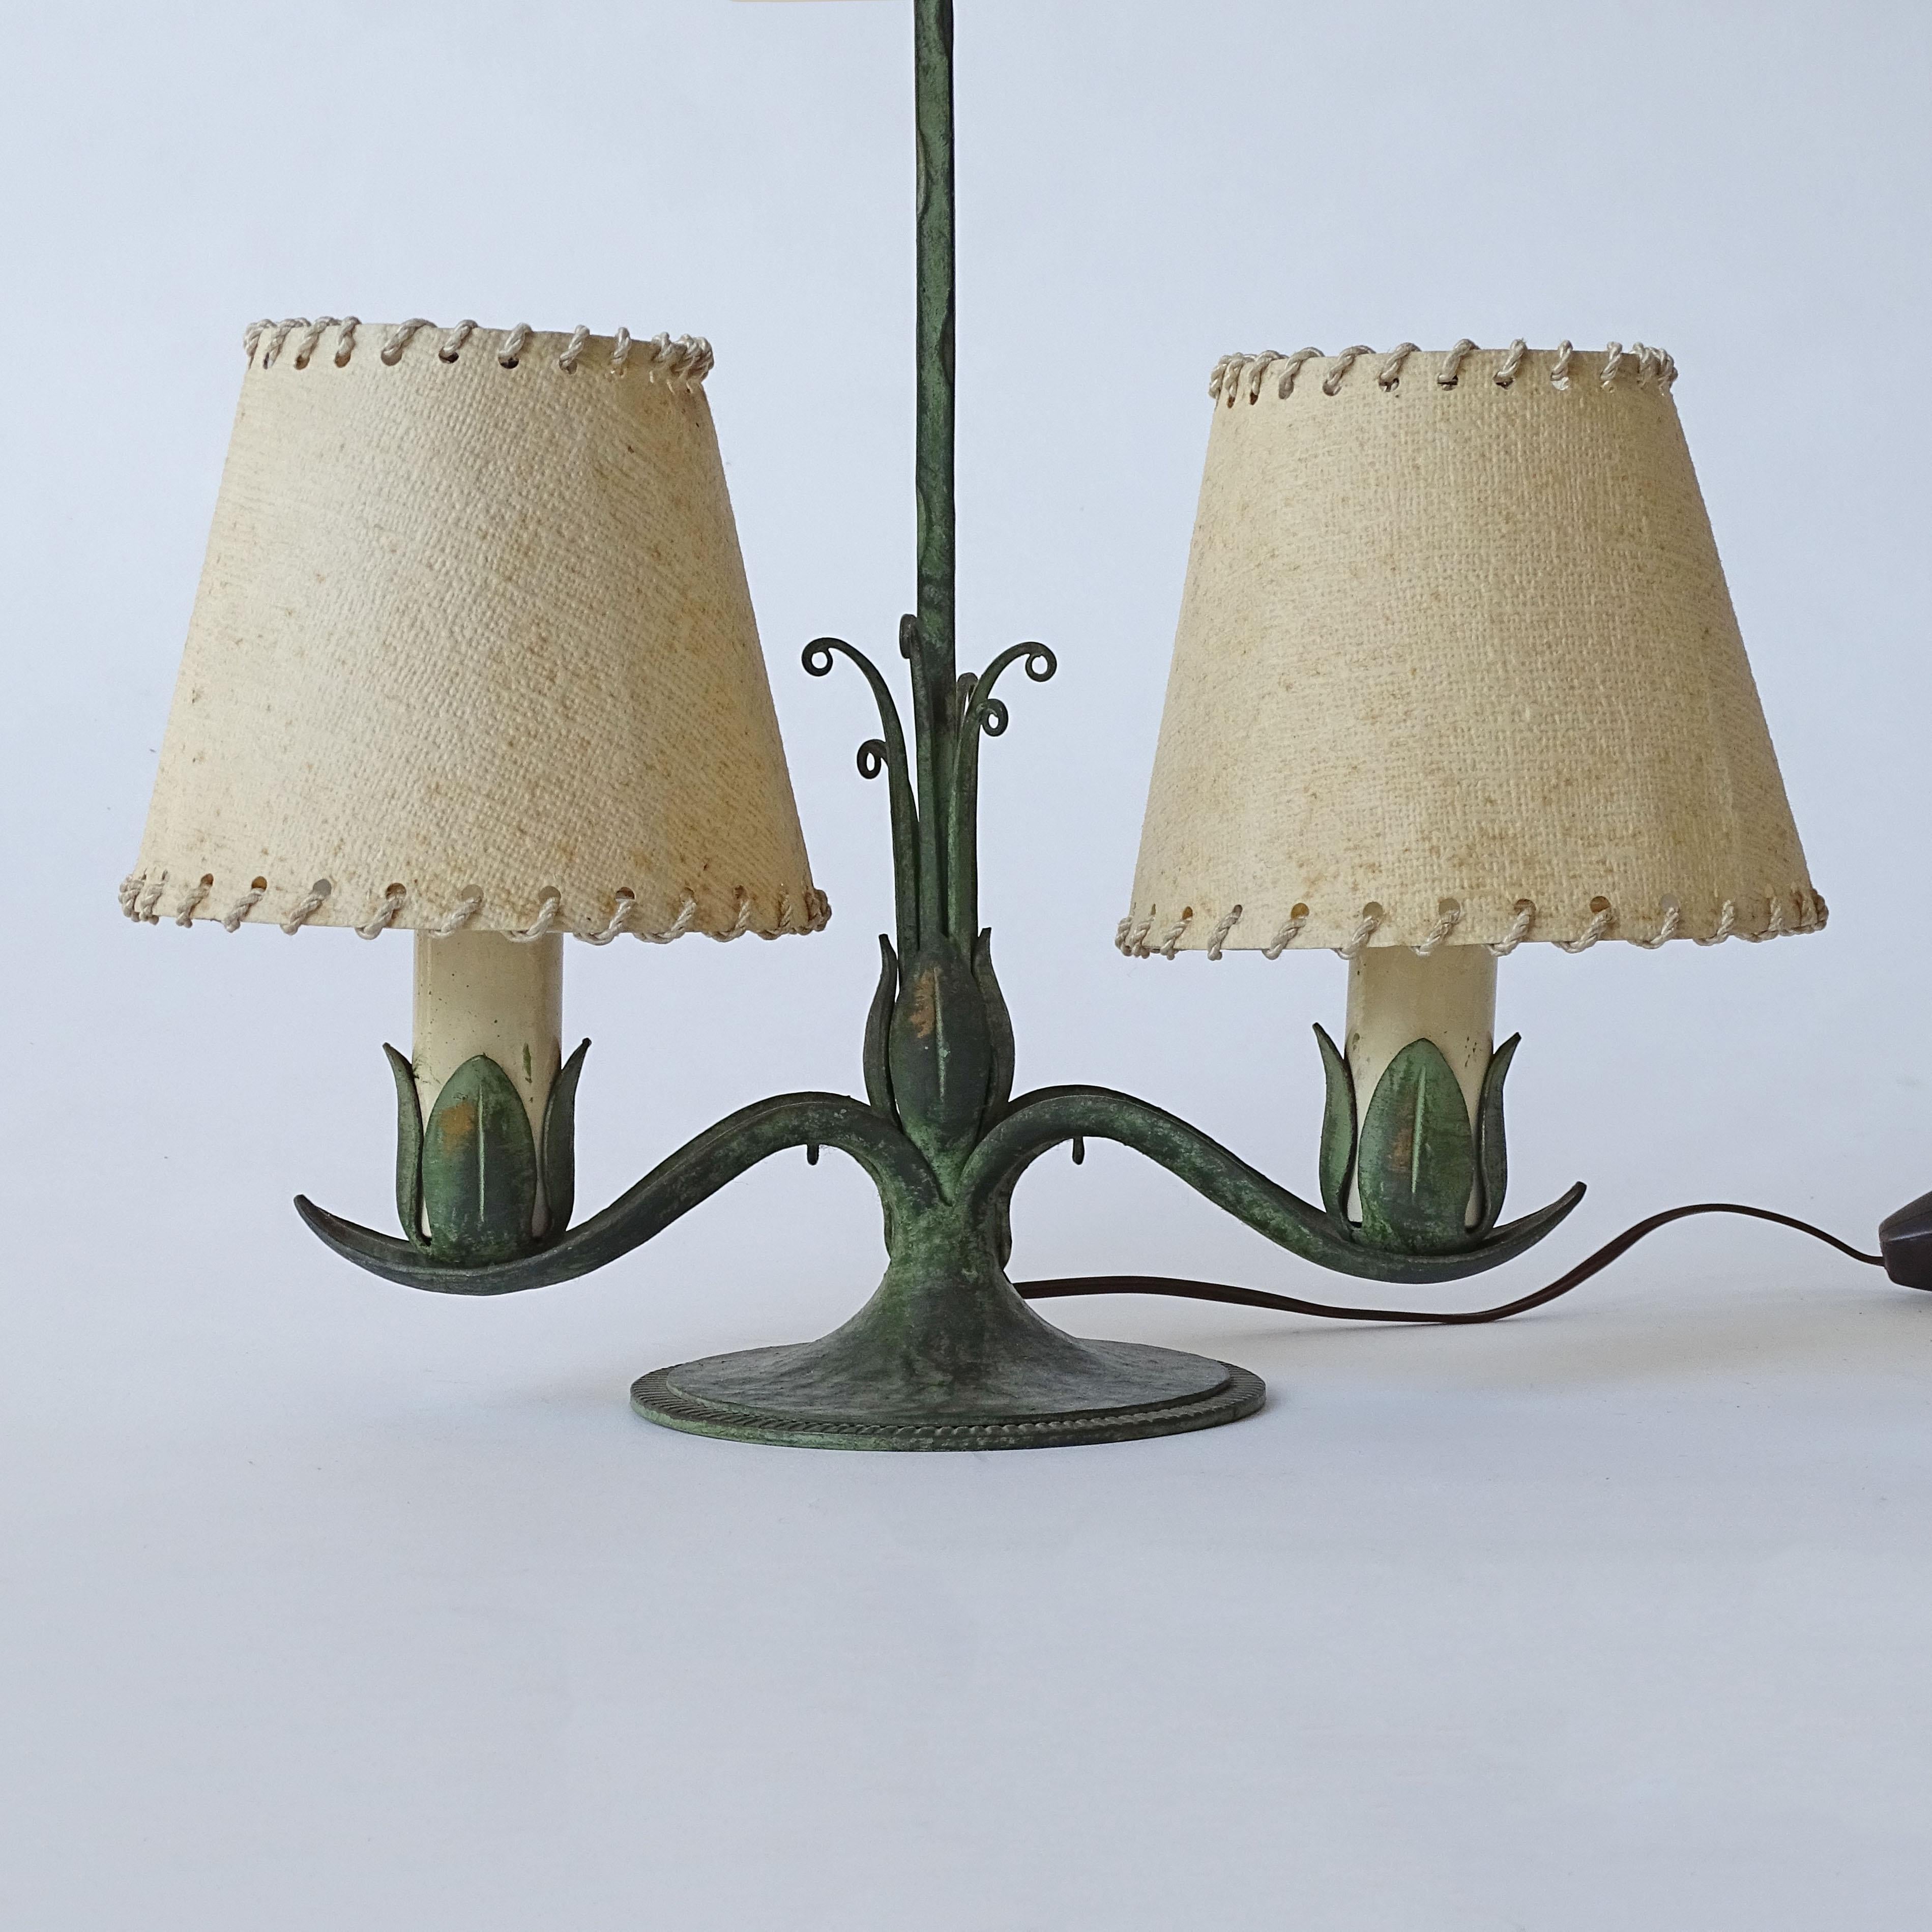 Italian 1940s Portable Wrought Iron Table Lamp.
Carries two bulbs
Attributed to the work of Carlo Rizzarda.